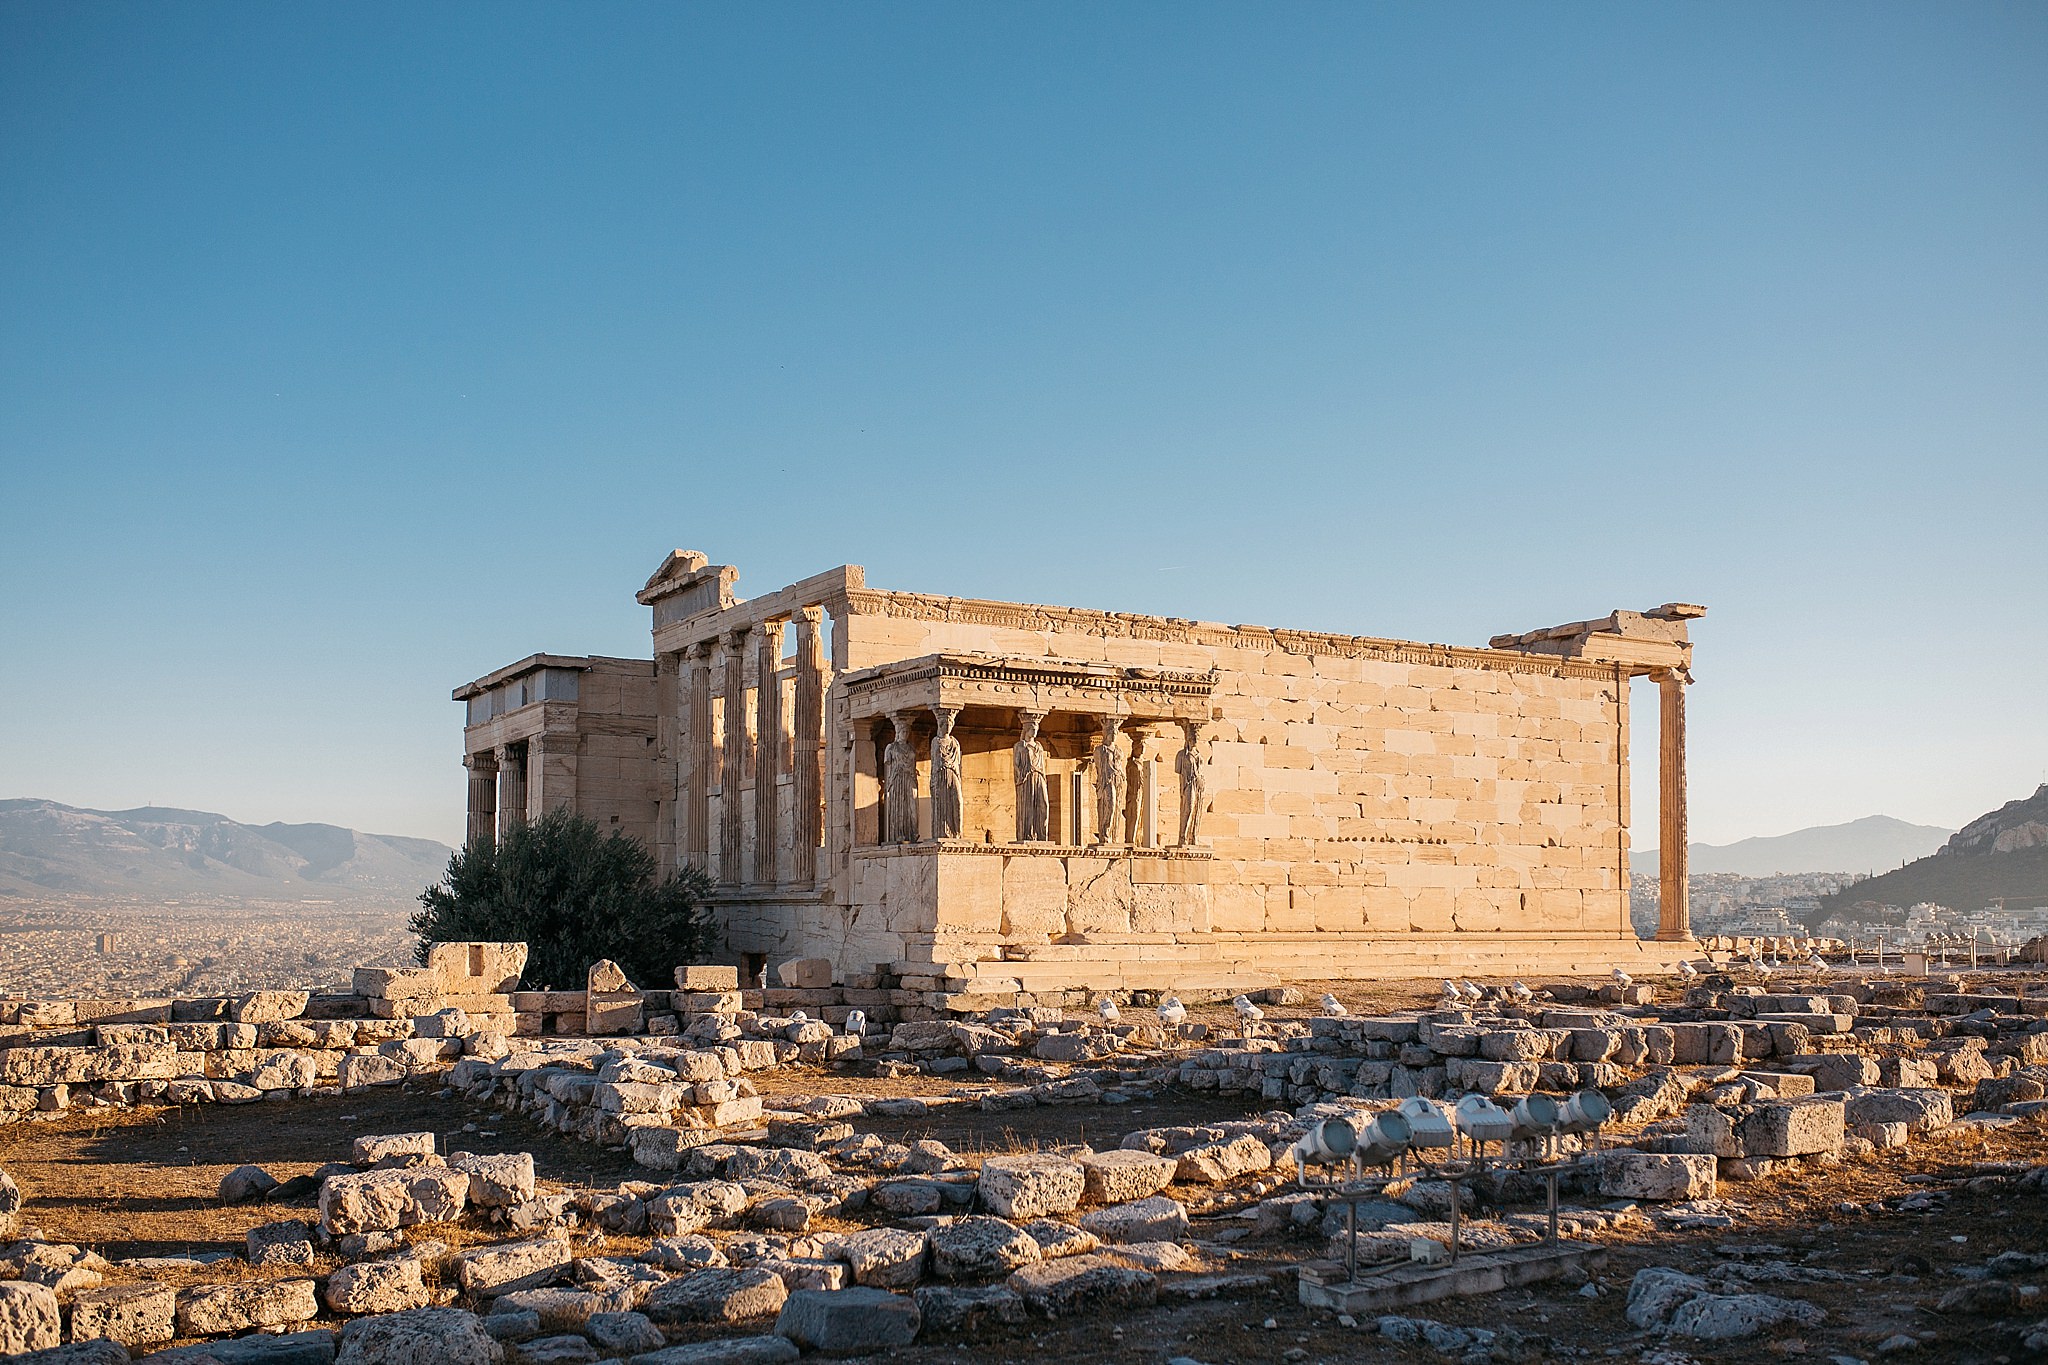    The Erechtheion is an ancient Greek temple on the north side of the Acropolis of Athens in Greece which was dedicated to both Athena and Poseidon.   